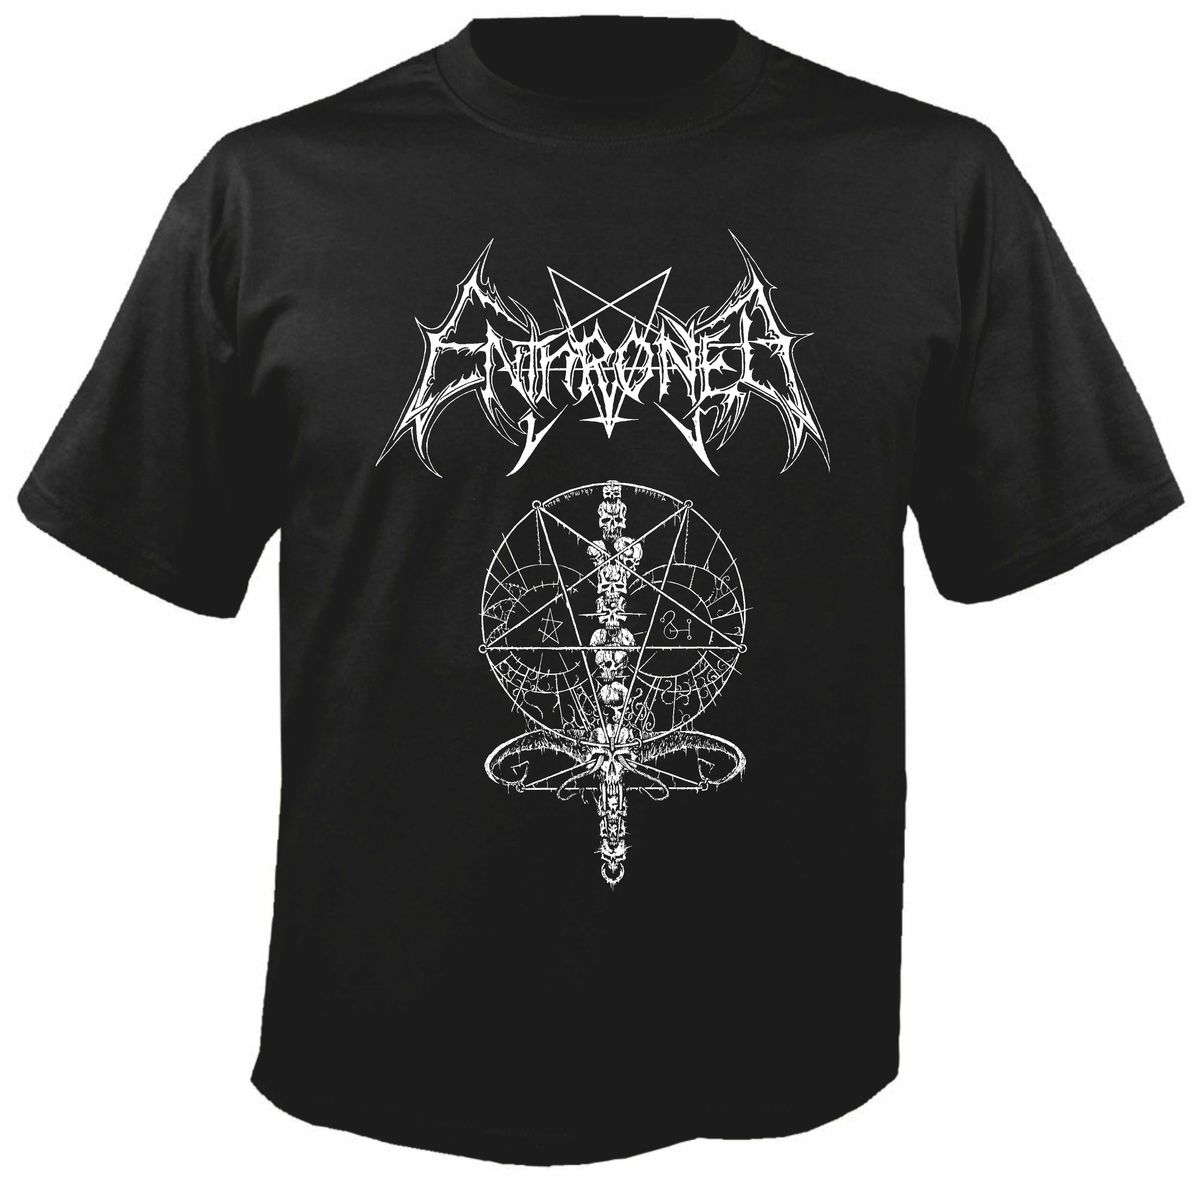 Enthroned Band T-Shirt – Metal & Rock T-shirts and Accessories